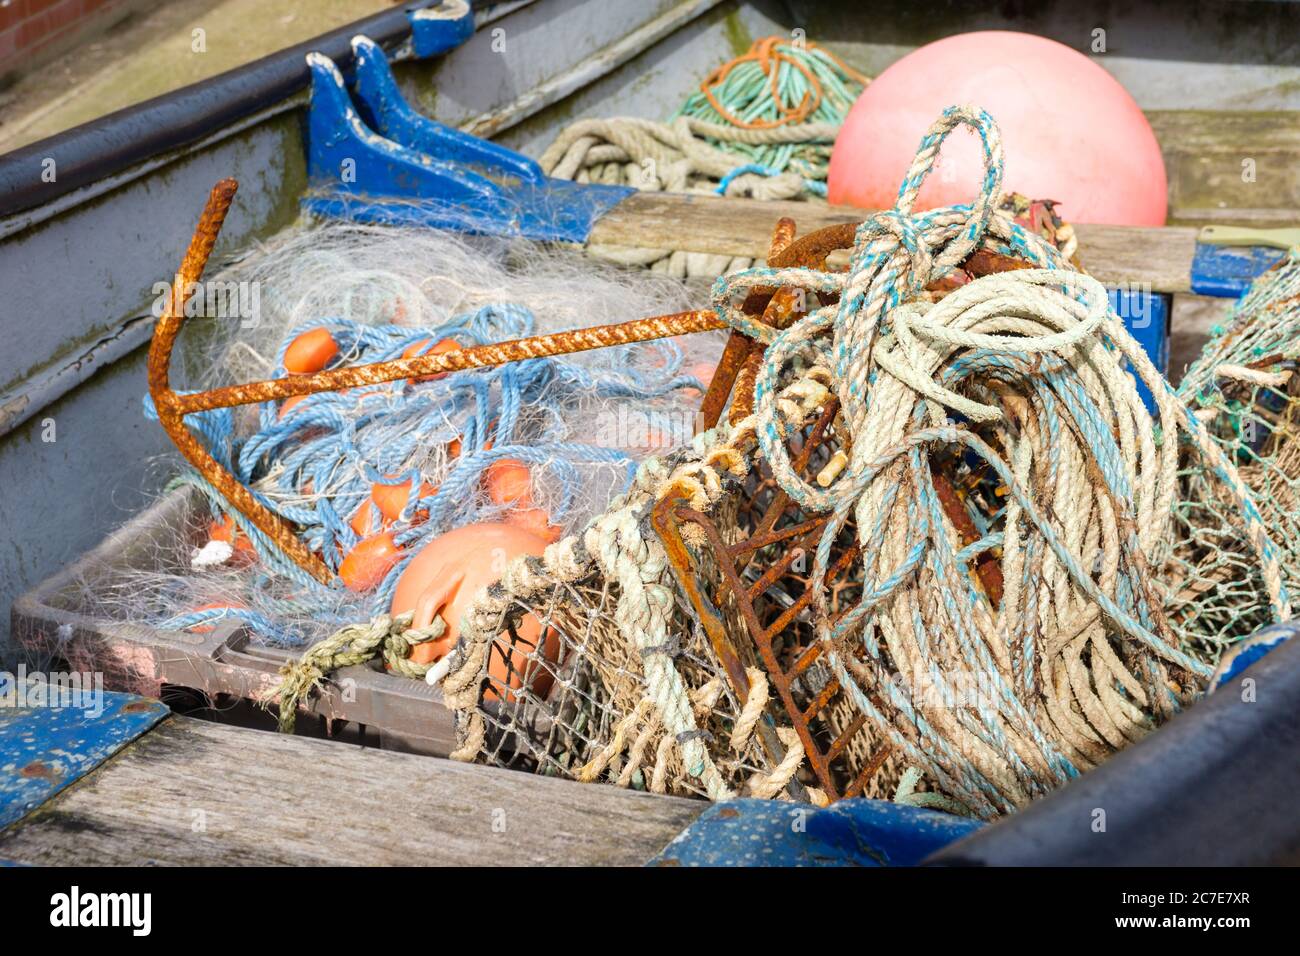 Fishing nets and tackle including lobster and crab pot, laying in a rowing boat. England, UK Stock Photo